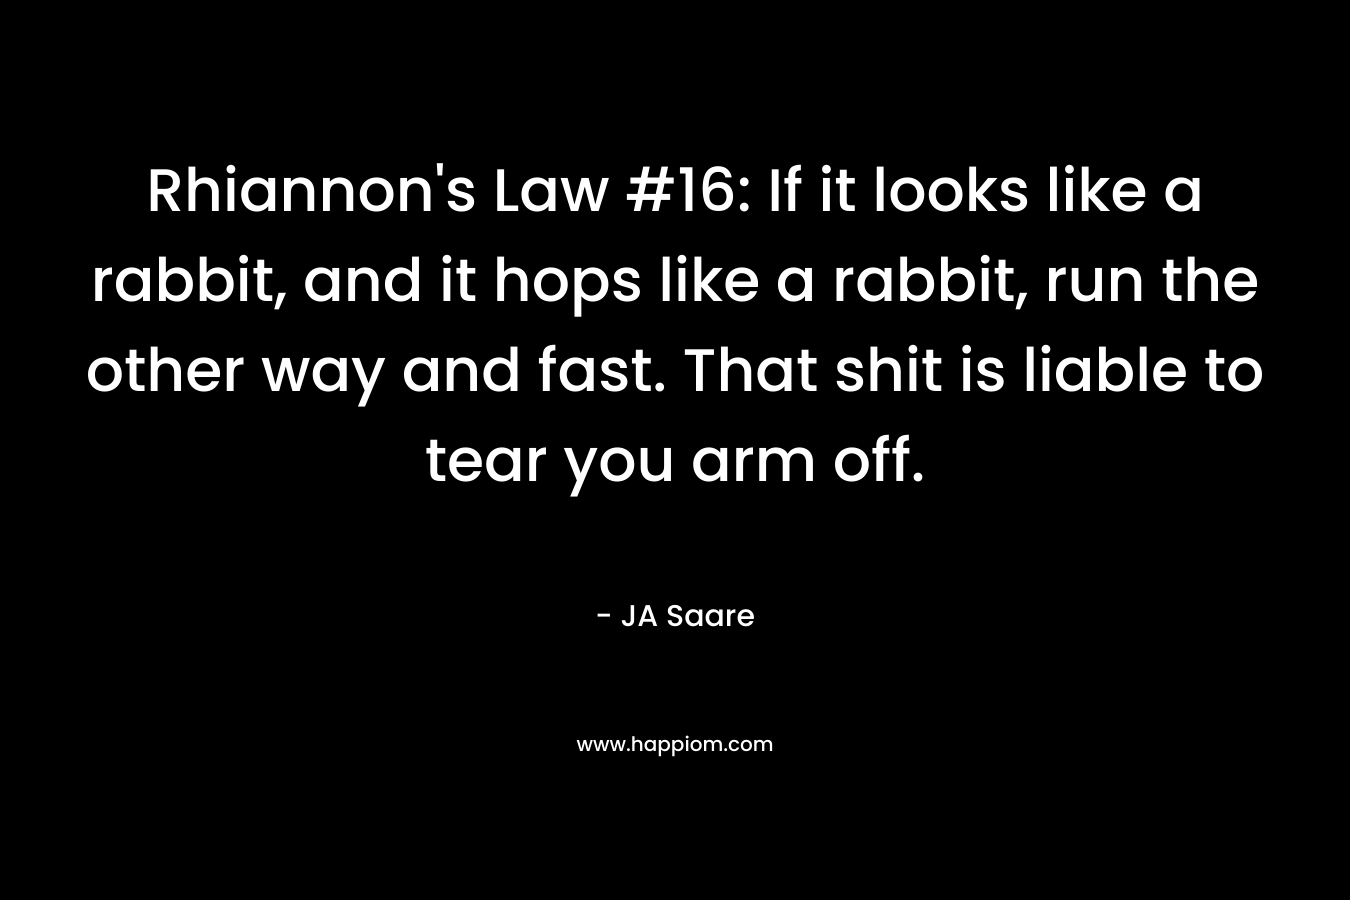 Rhiannon’s Law #16: If it looks like a rabbit, and it hops like a rabbit, run the other way and fast. That shit is liable to tear you arm off. – JA Saare